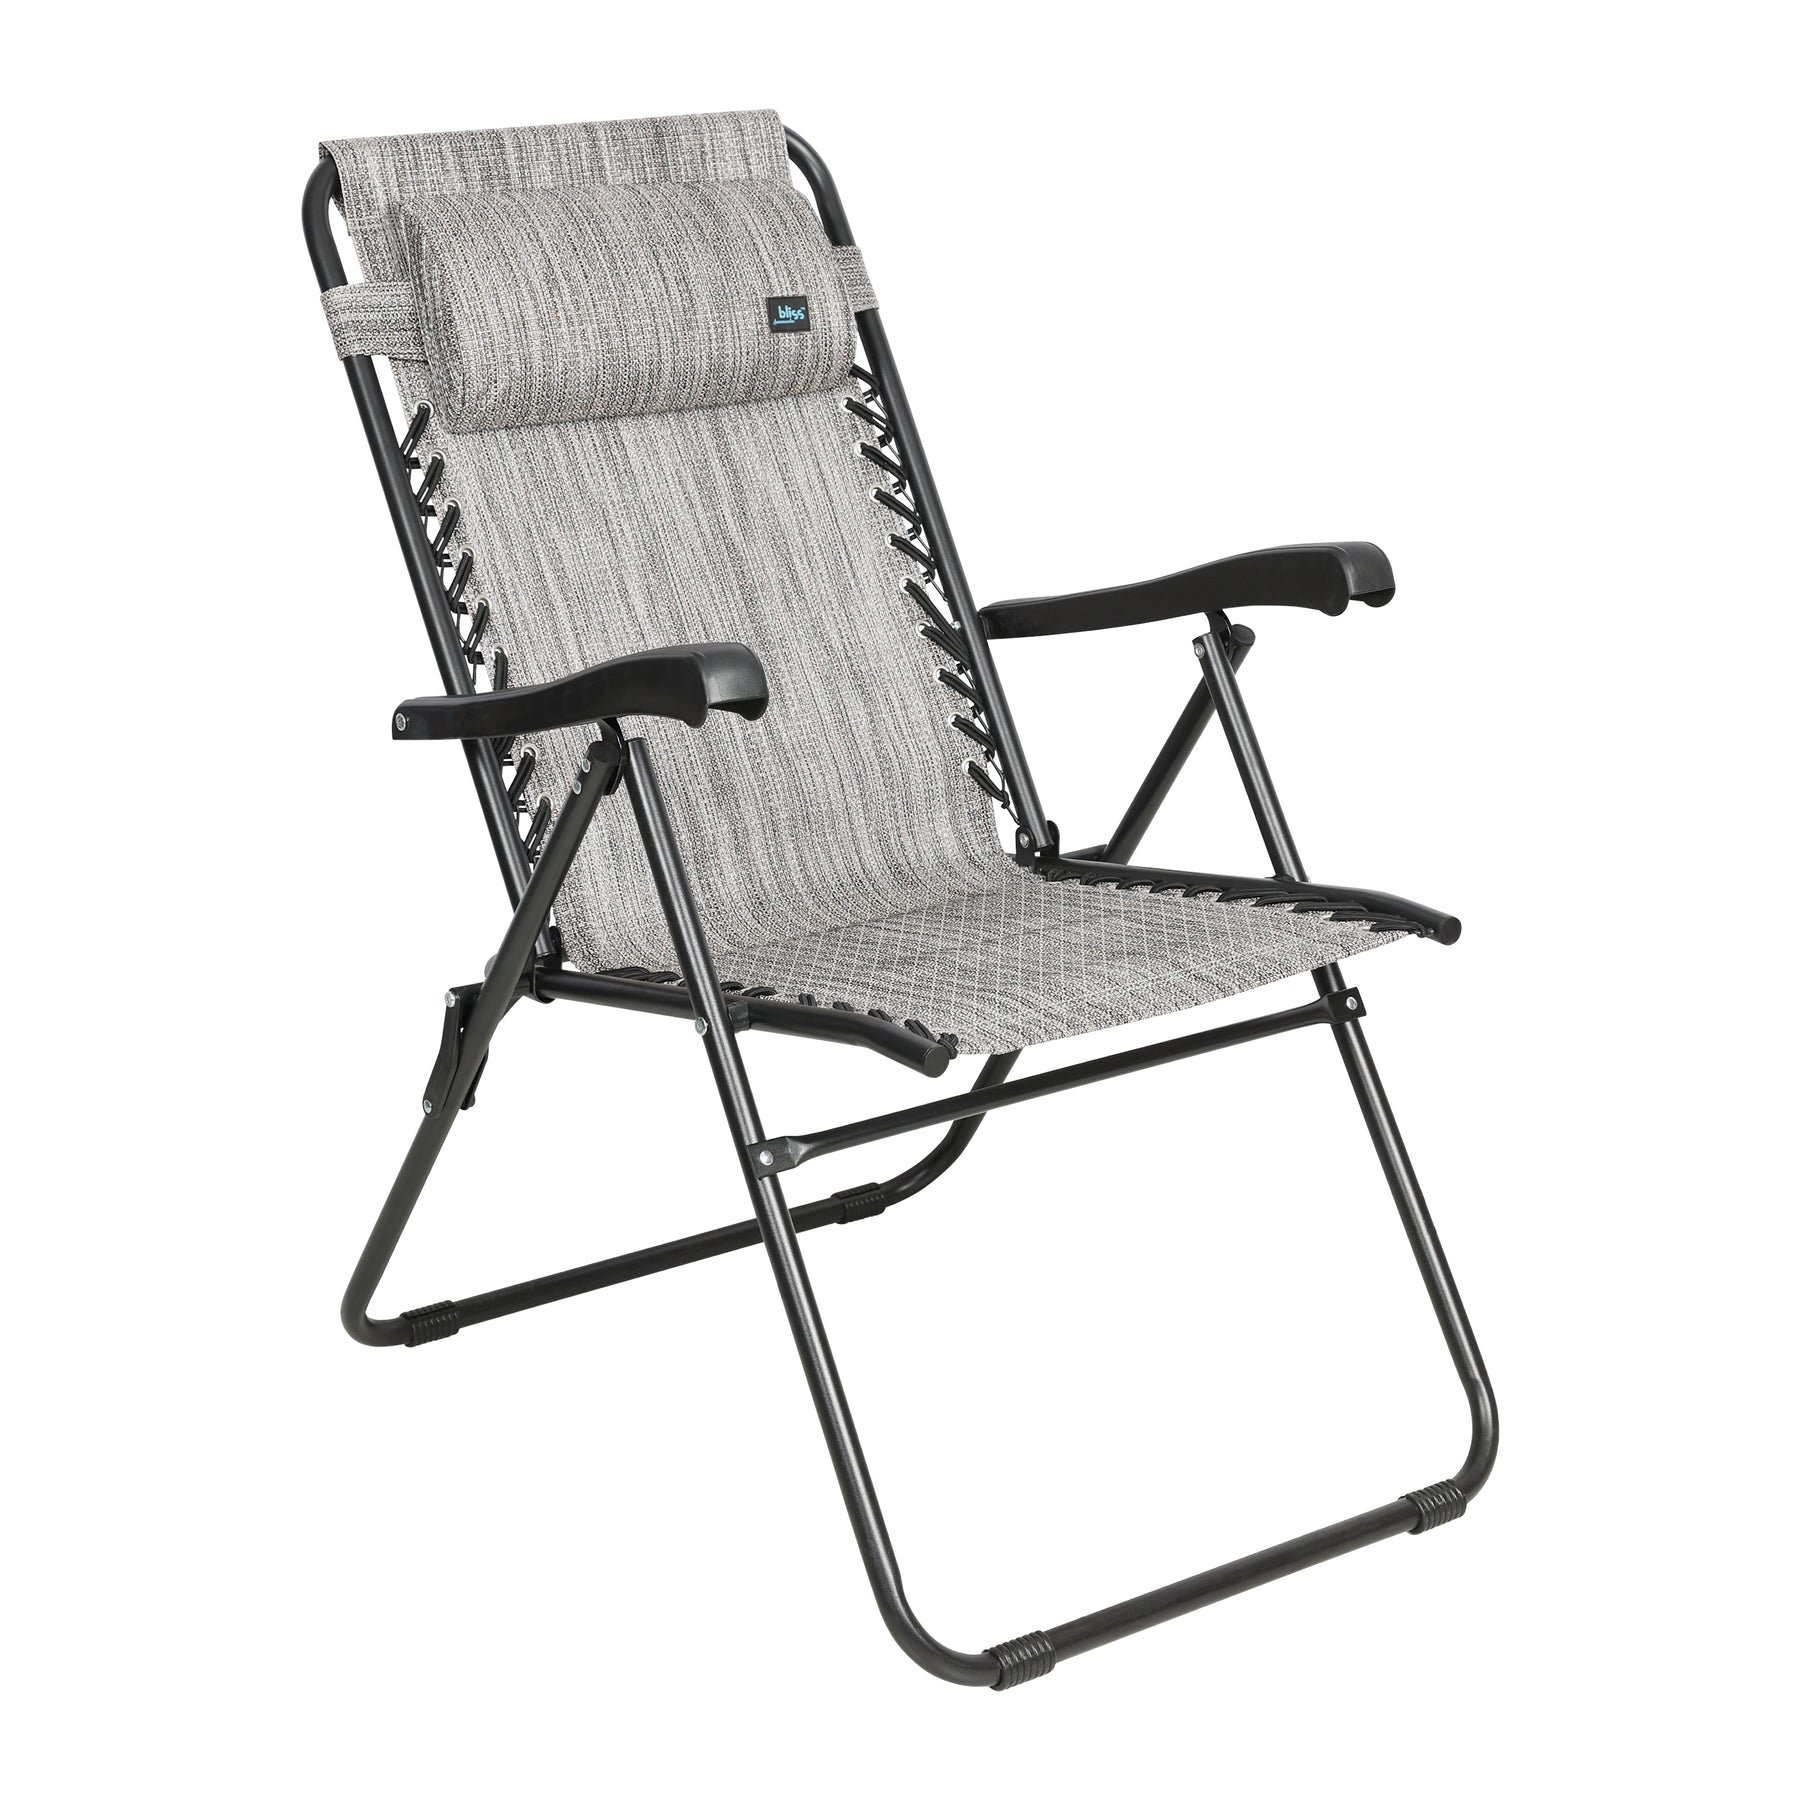 Bliss Hammocks 26-inch Wide Reclining Sling Chair with Pillow in the platinum variation.